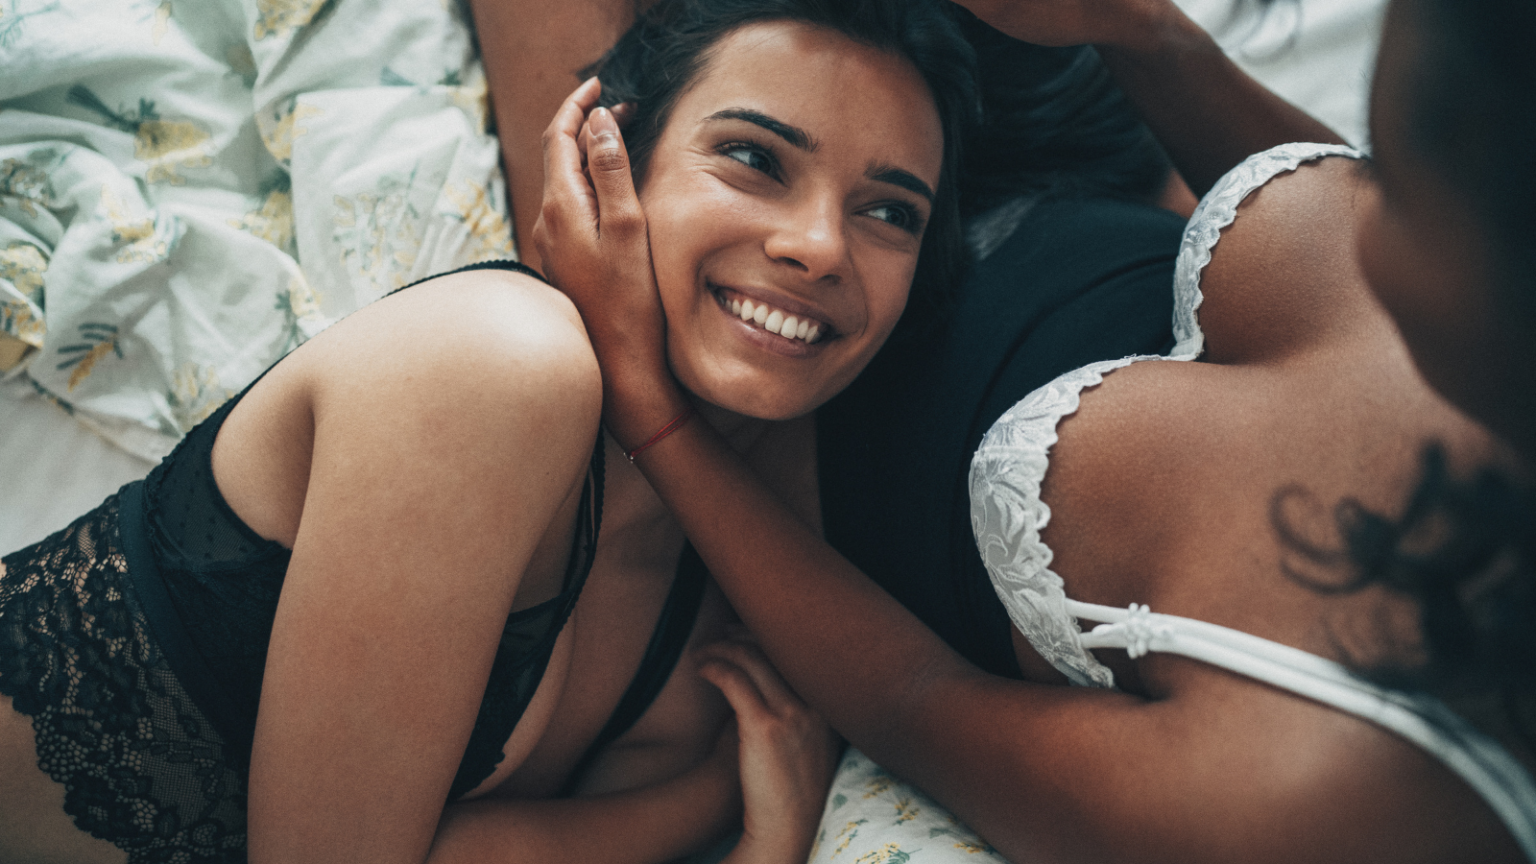 Photo of two feminine looking partners, both with brown skin, one wearing white lingerie and the other wearing black lingerie. One parter has their head in the other's lap and is smiling up at them